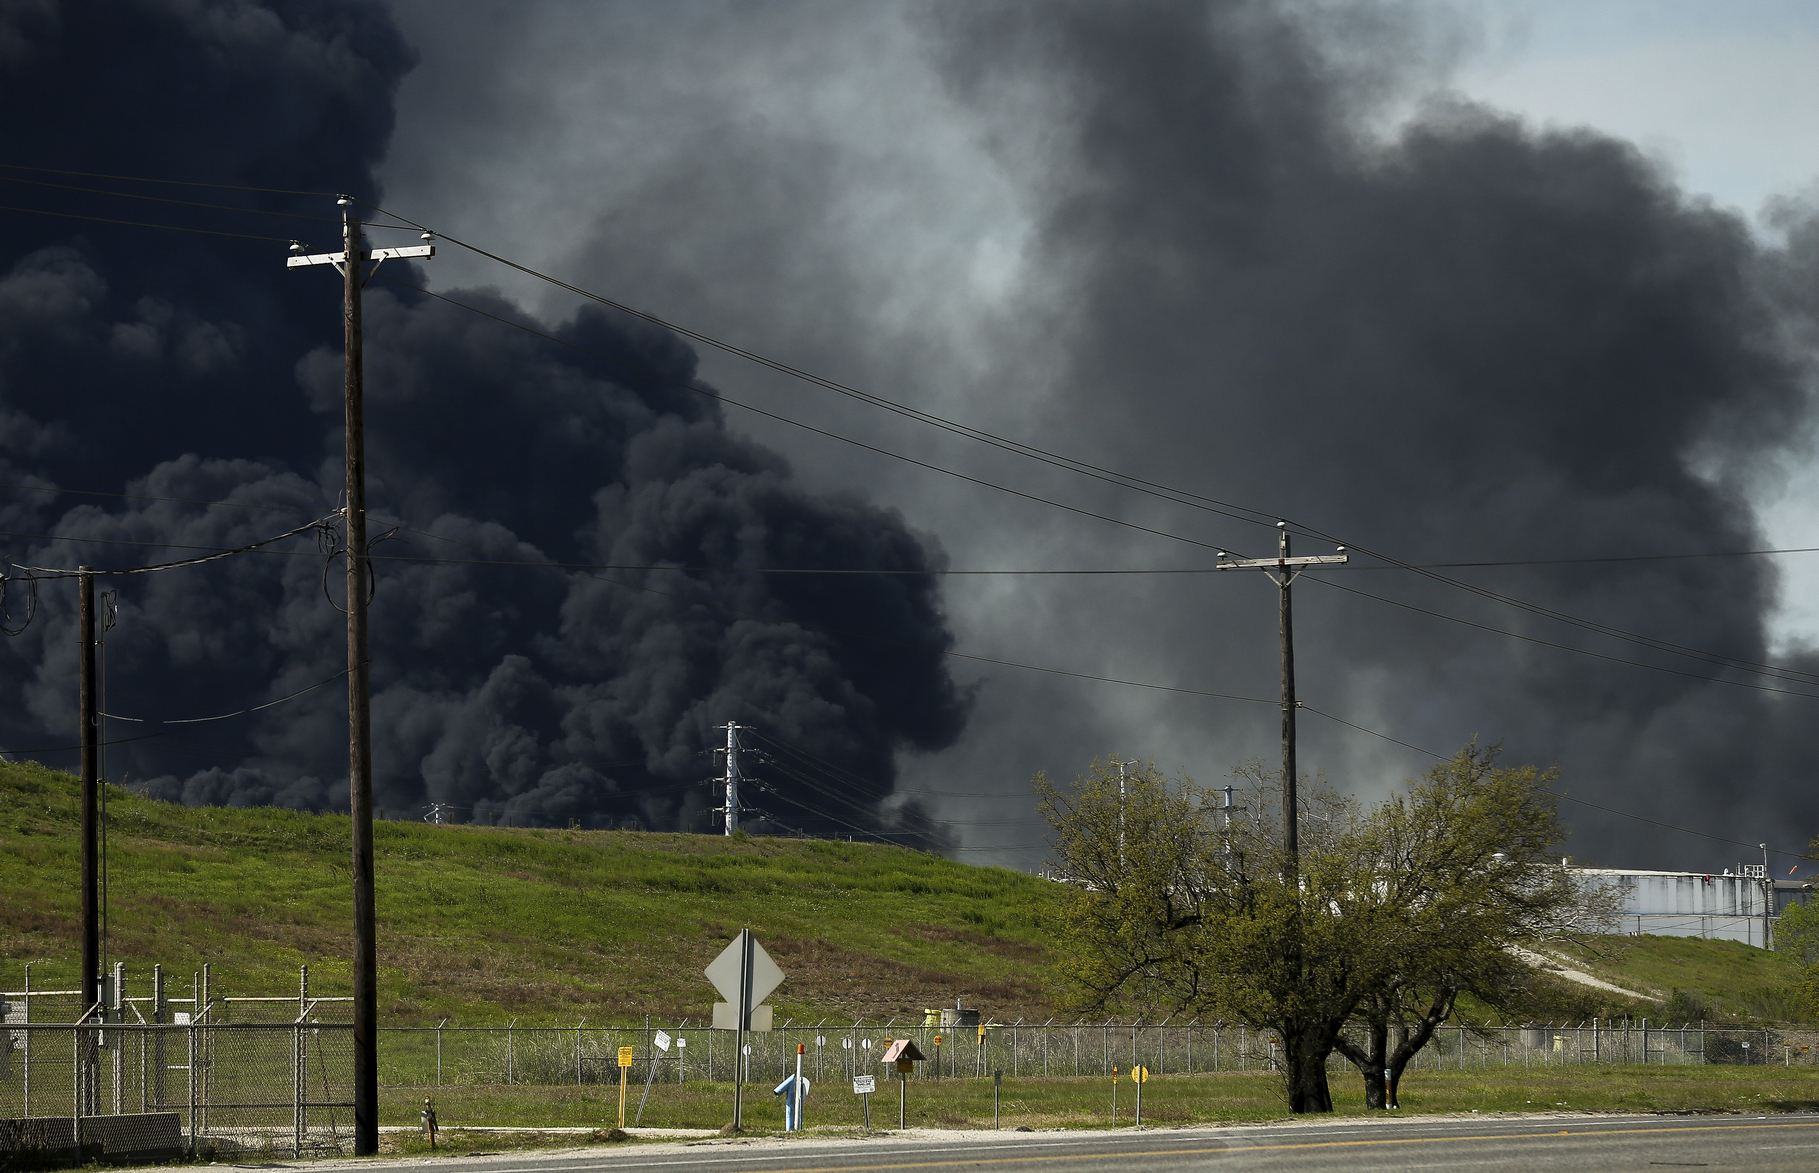 PHOTO: The petrochemical fire at Intercontinental Terminals Company reignited as crews tried to clean out the chemicals that remained in the tanks Friday, March 22, 2019, in Deer Park, Texas.